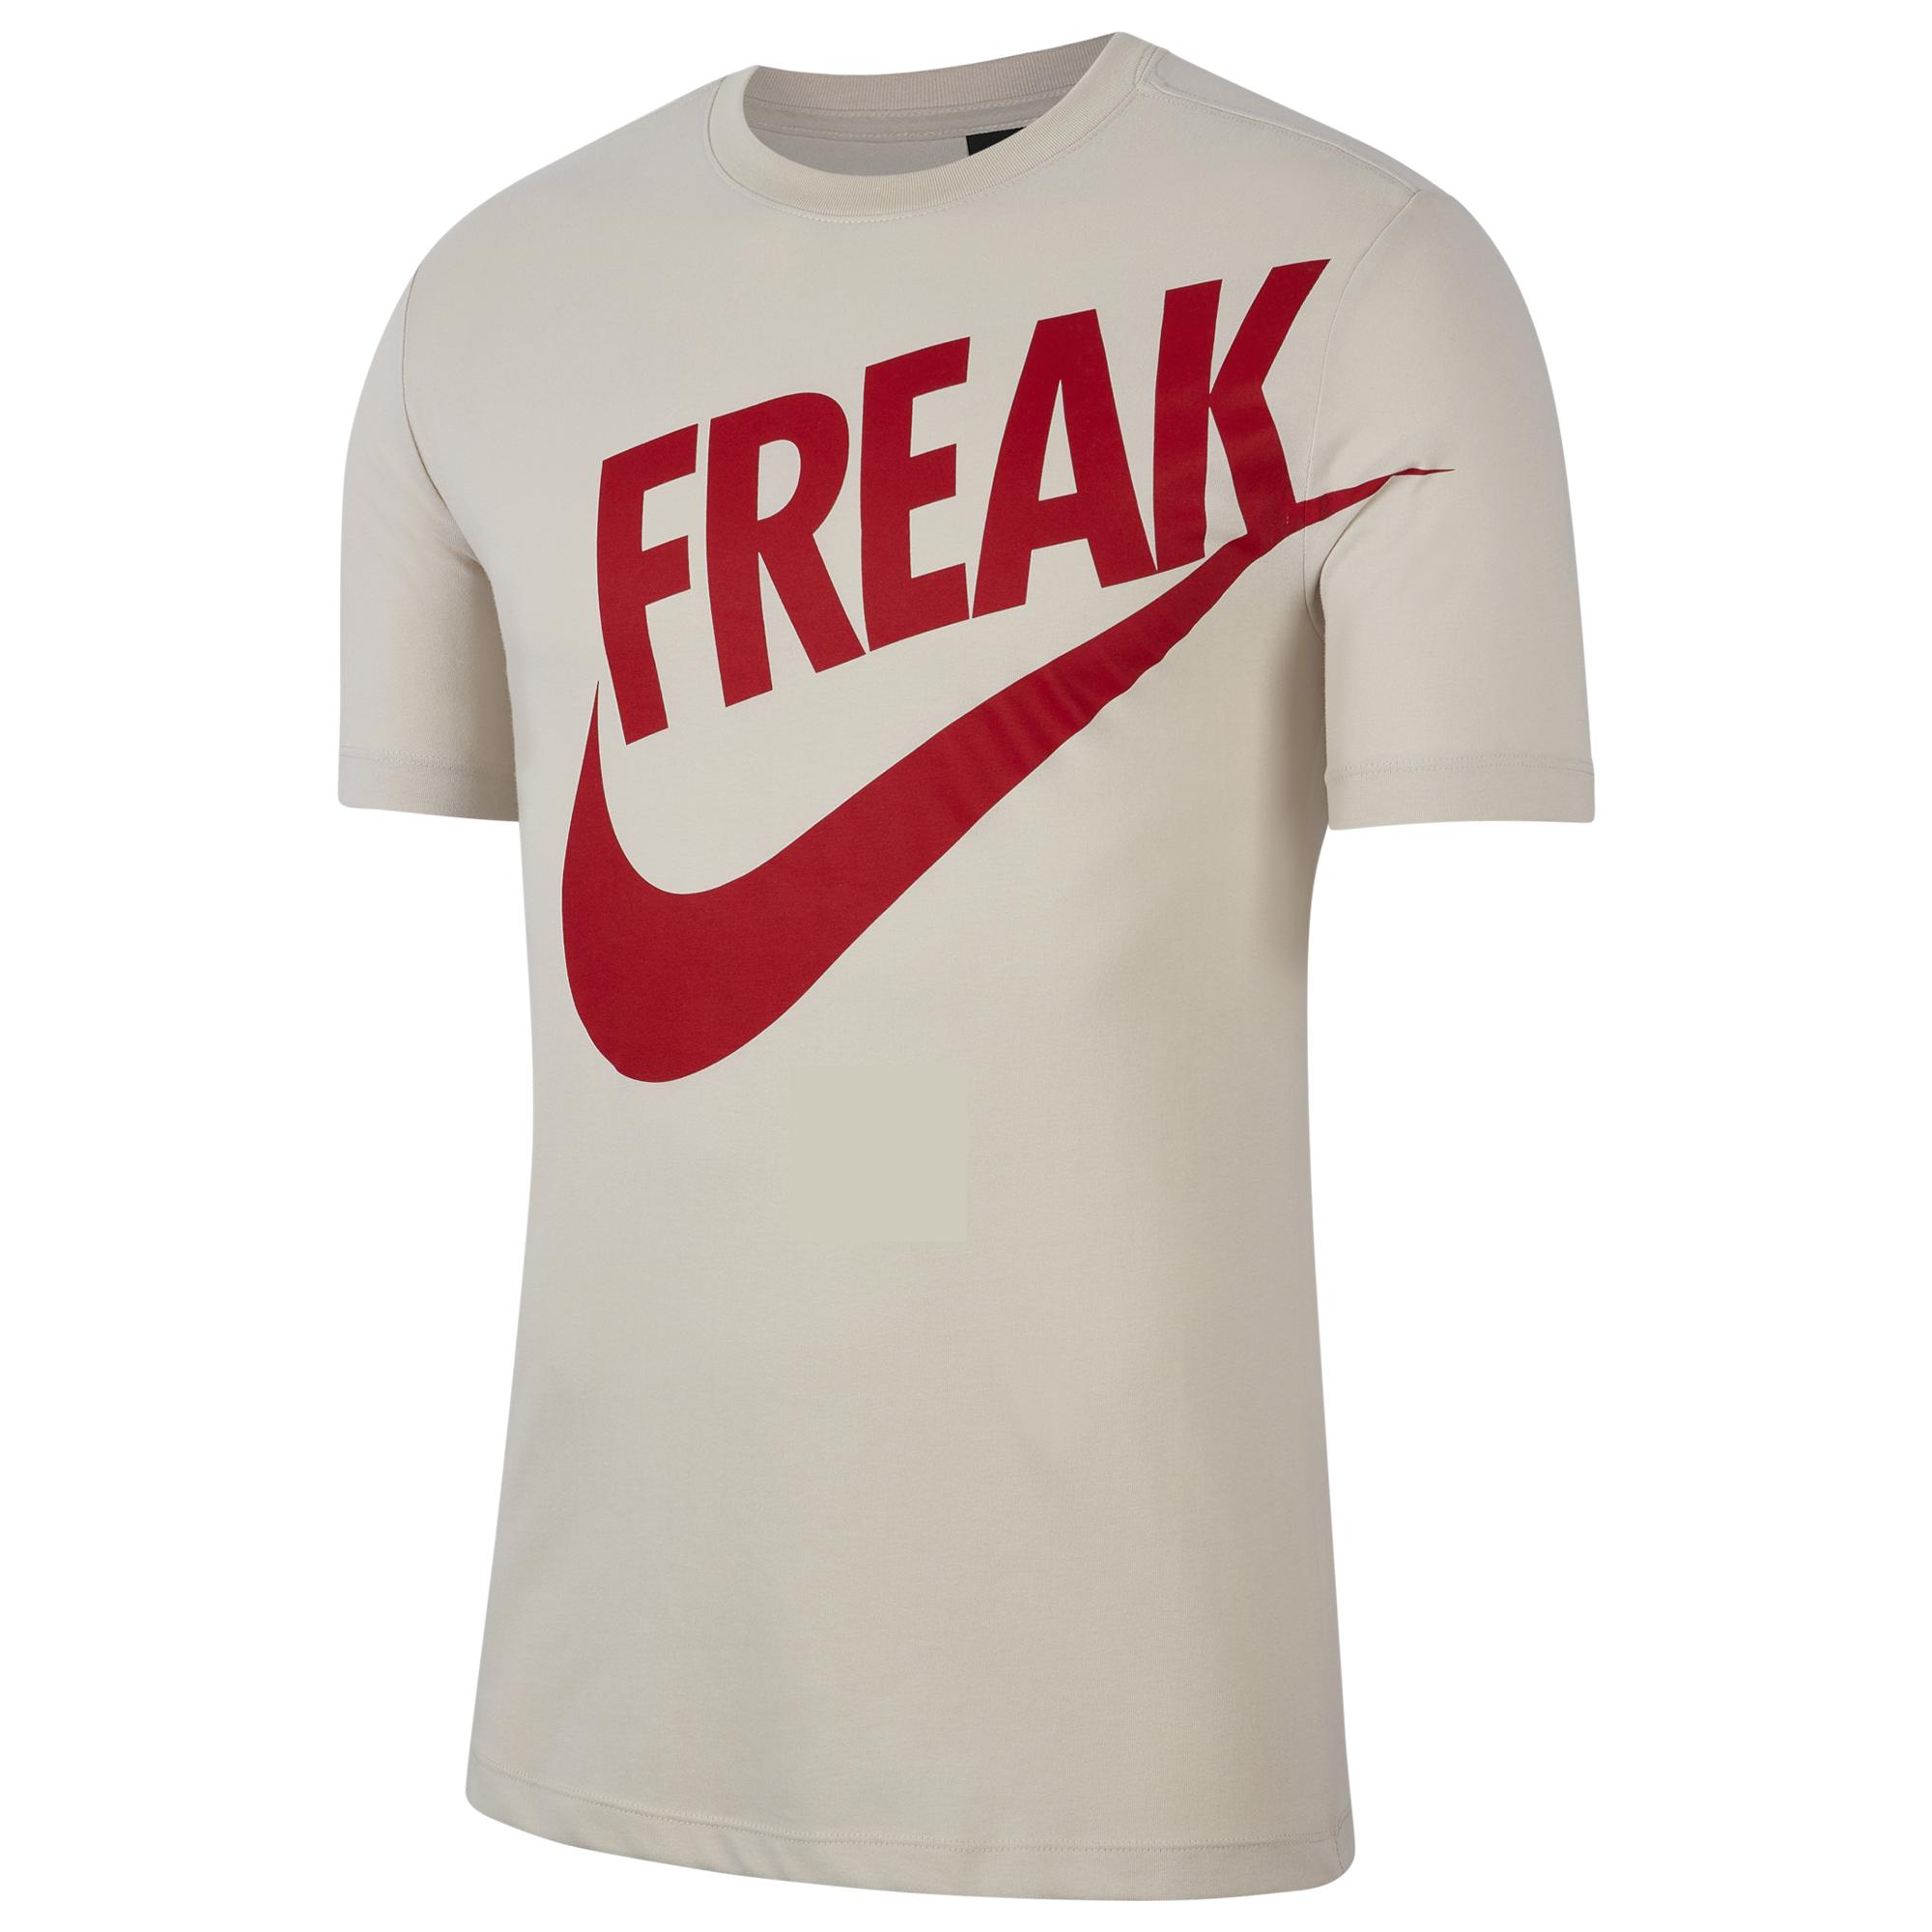 Freak Nike T Shirt Clearance Sale, UP TO 58% OFF